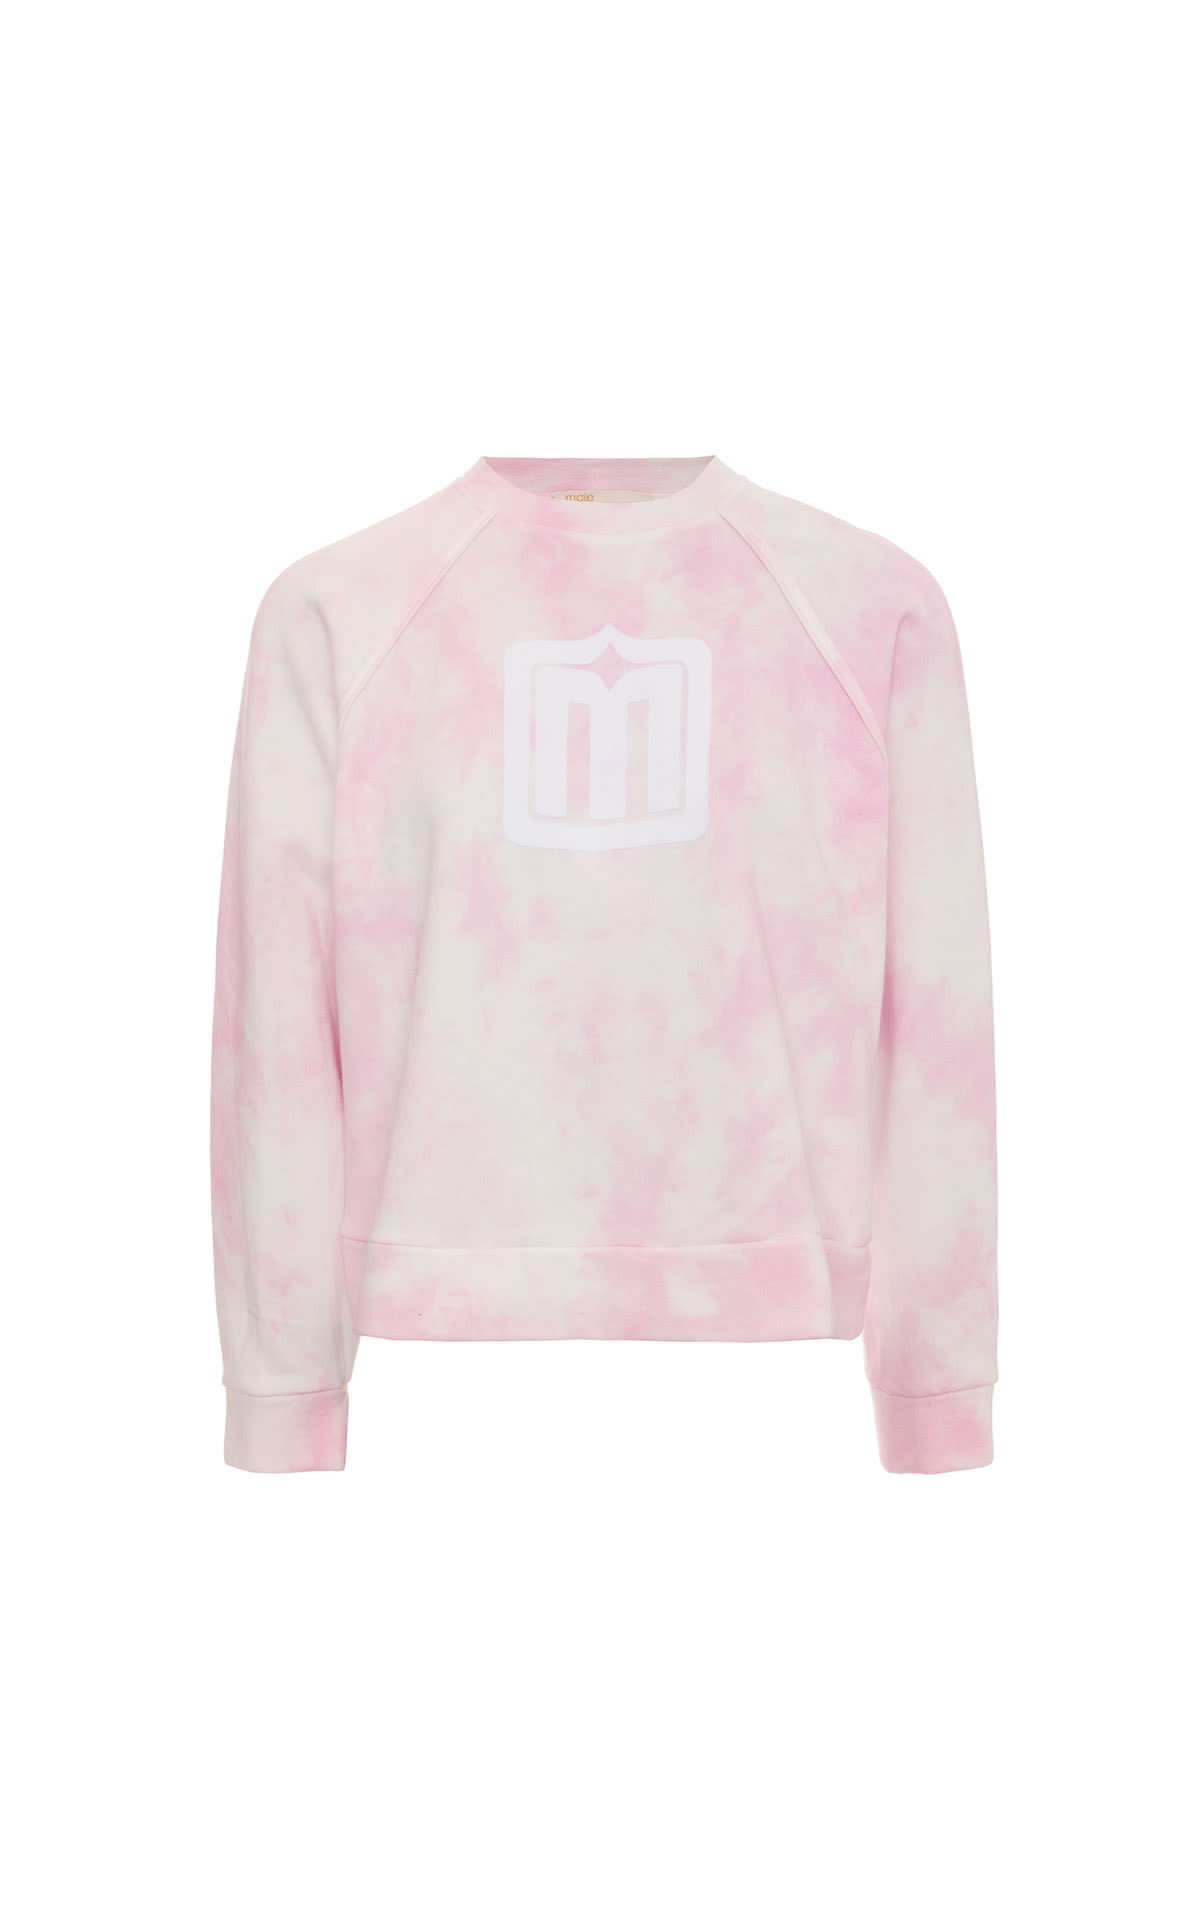 Maje Tie and dye print sweatshirt from Bicester Village